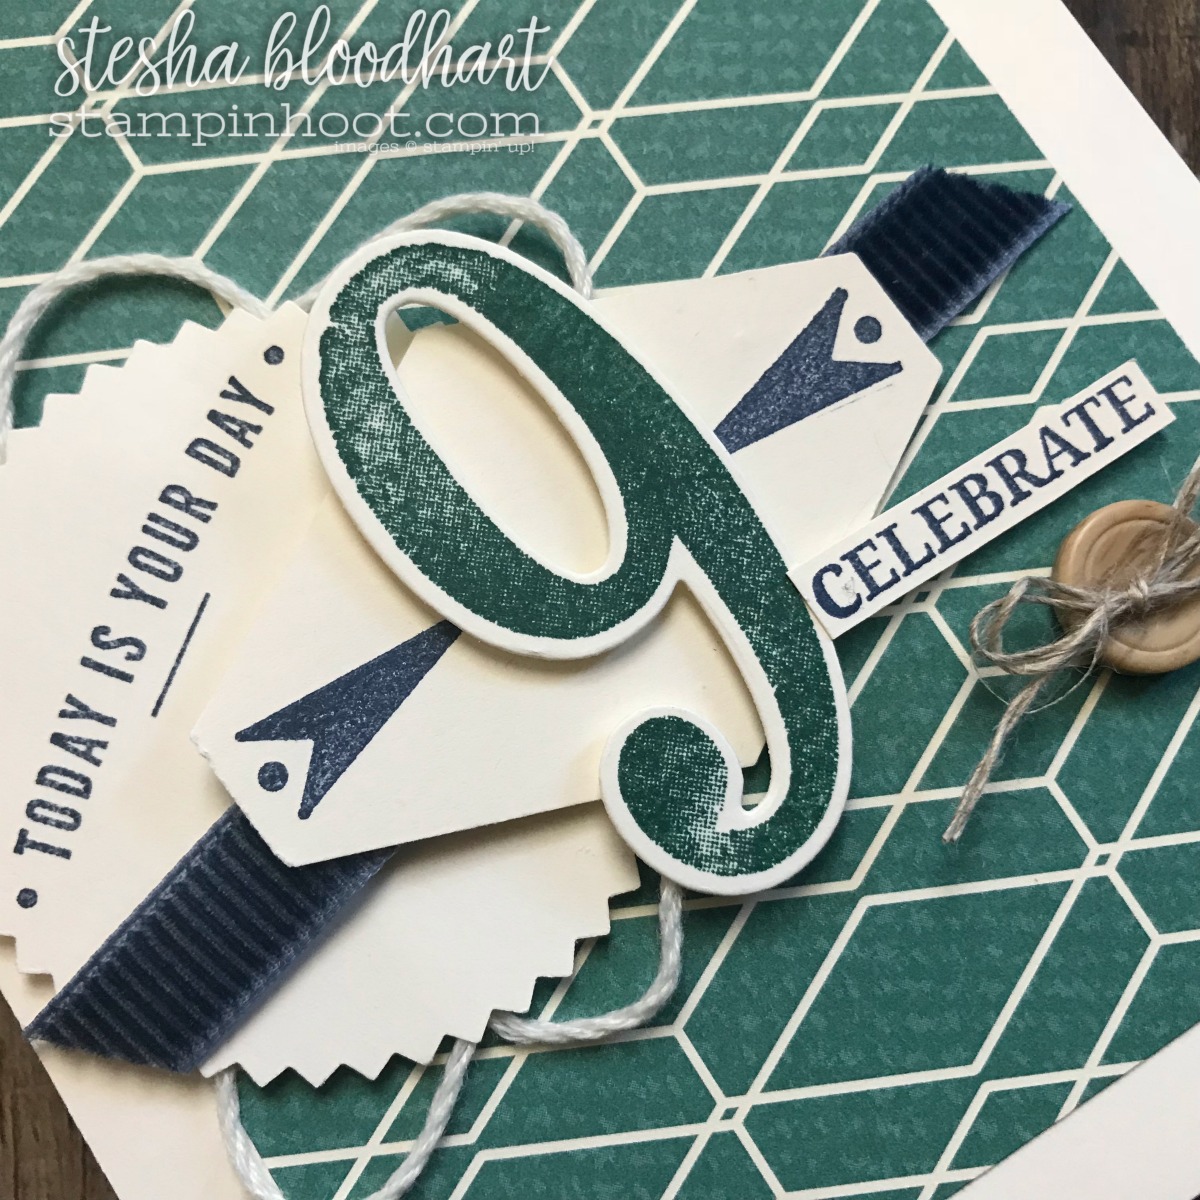 True Gentleman Suite by Stampin' Up! 2018 Occasions Catalog for Global Design Project 120 Happy 9th Birthday #GDP120 #truegentleman #steshabloodhart #stampinhoot